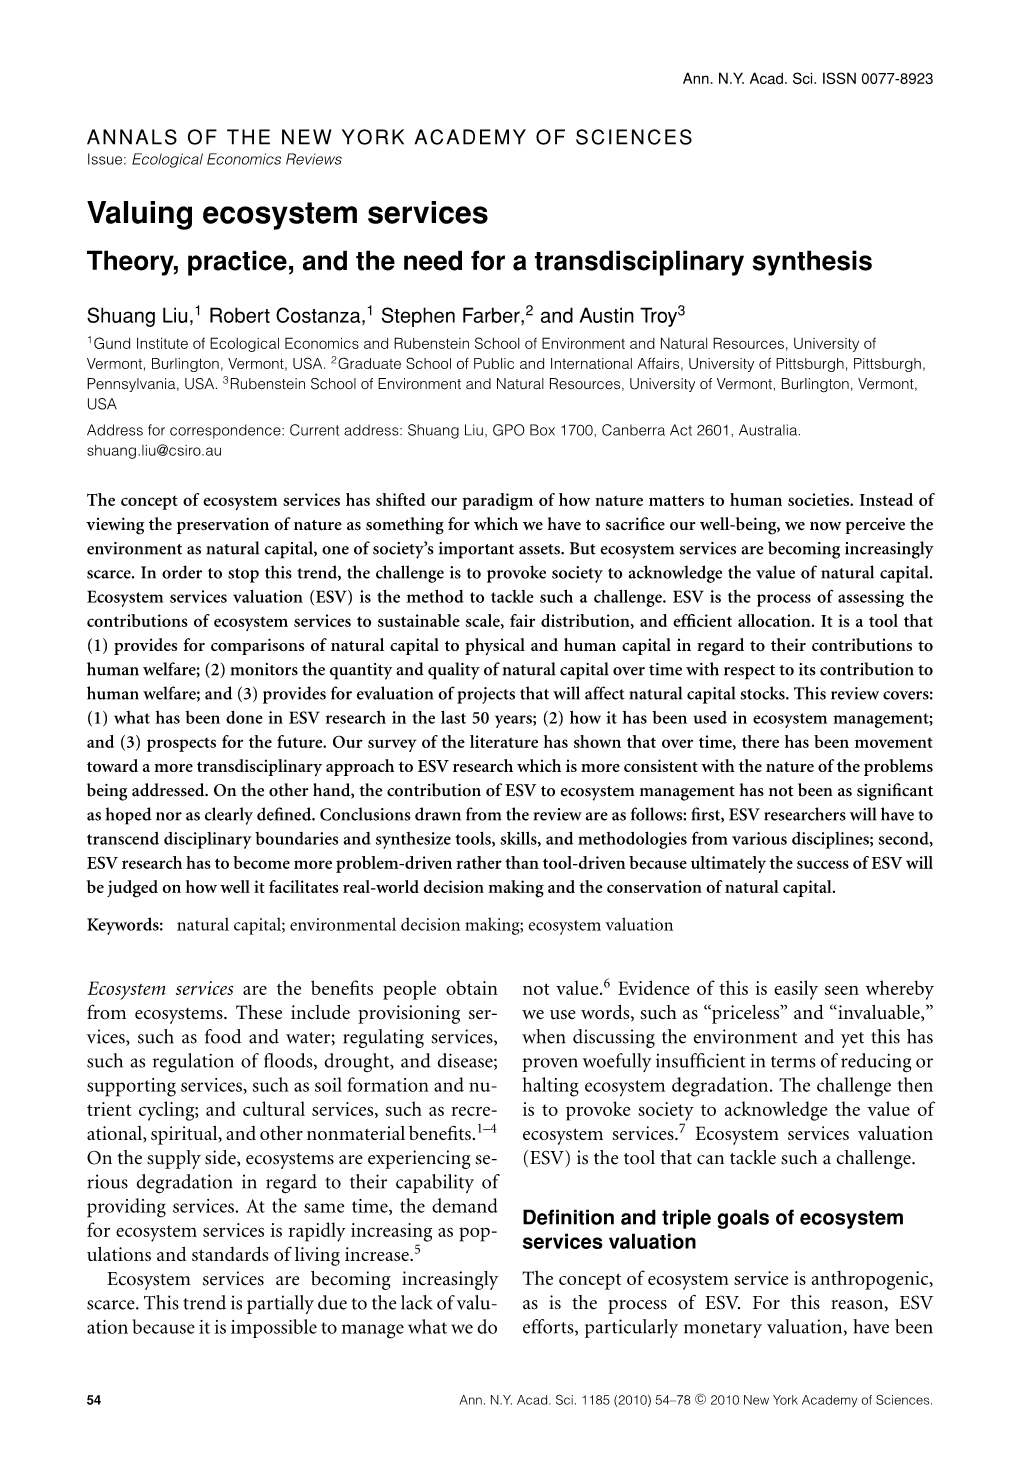 Valuing Ecosystem Services Theory, Practice, and the Need for a Transdisciplinary Synthesis